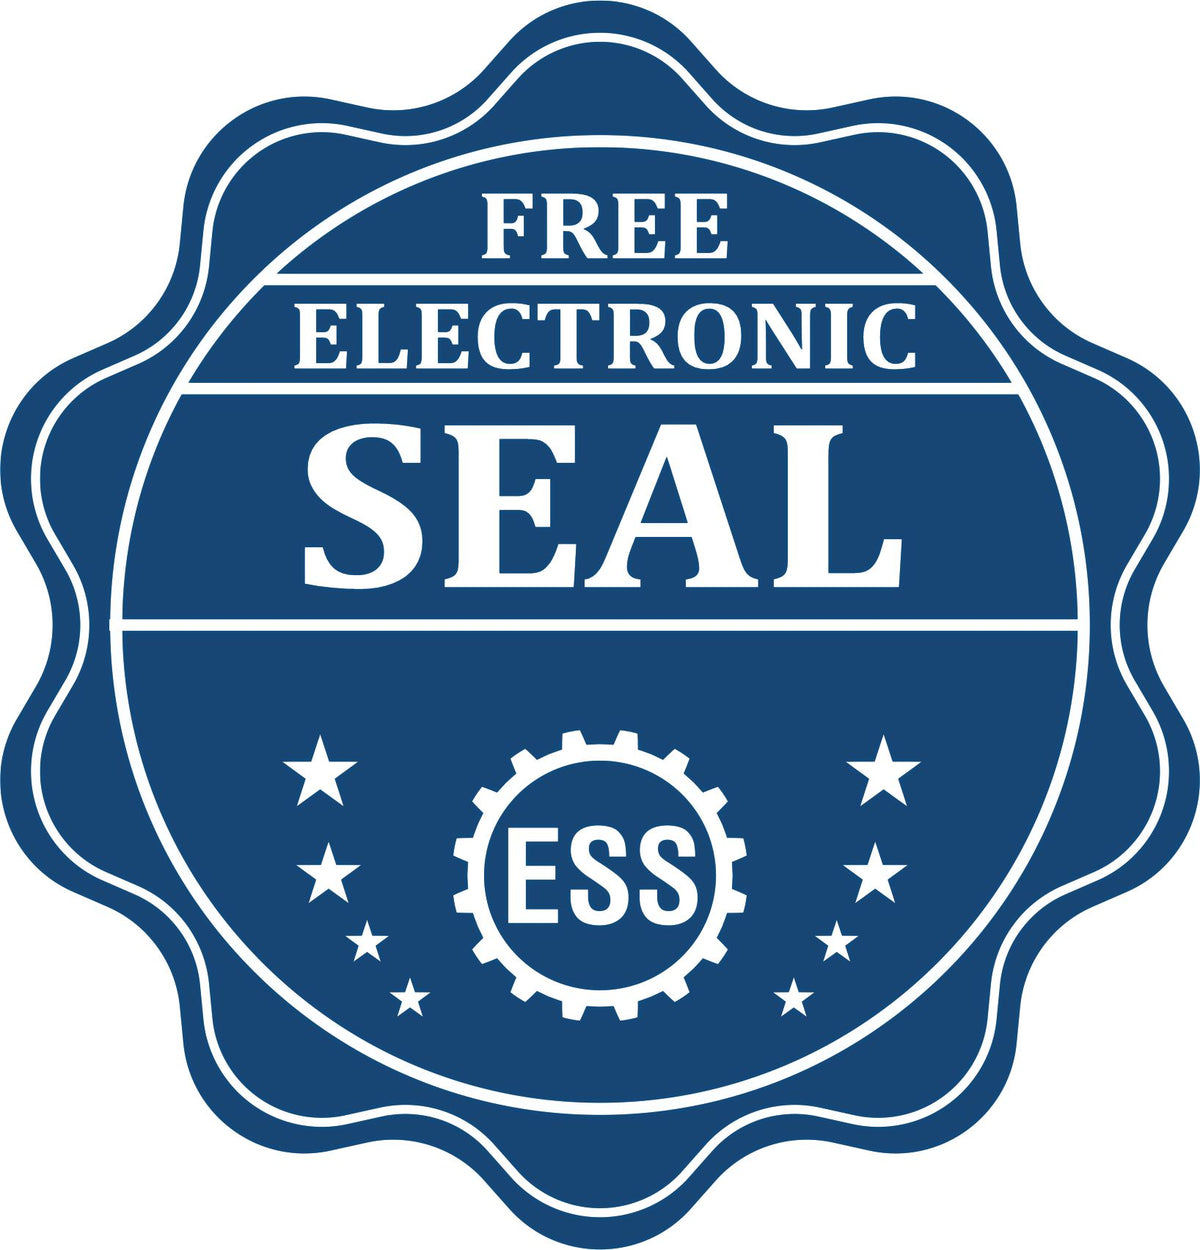 A badge showing a free electronic seal for the Gift District of Columbia Land Surveyor Seal with stars and the ESS gear on the emblem.